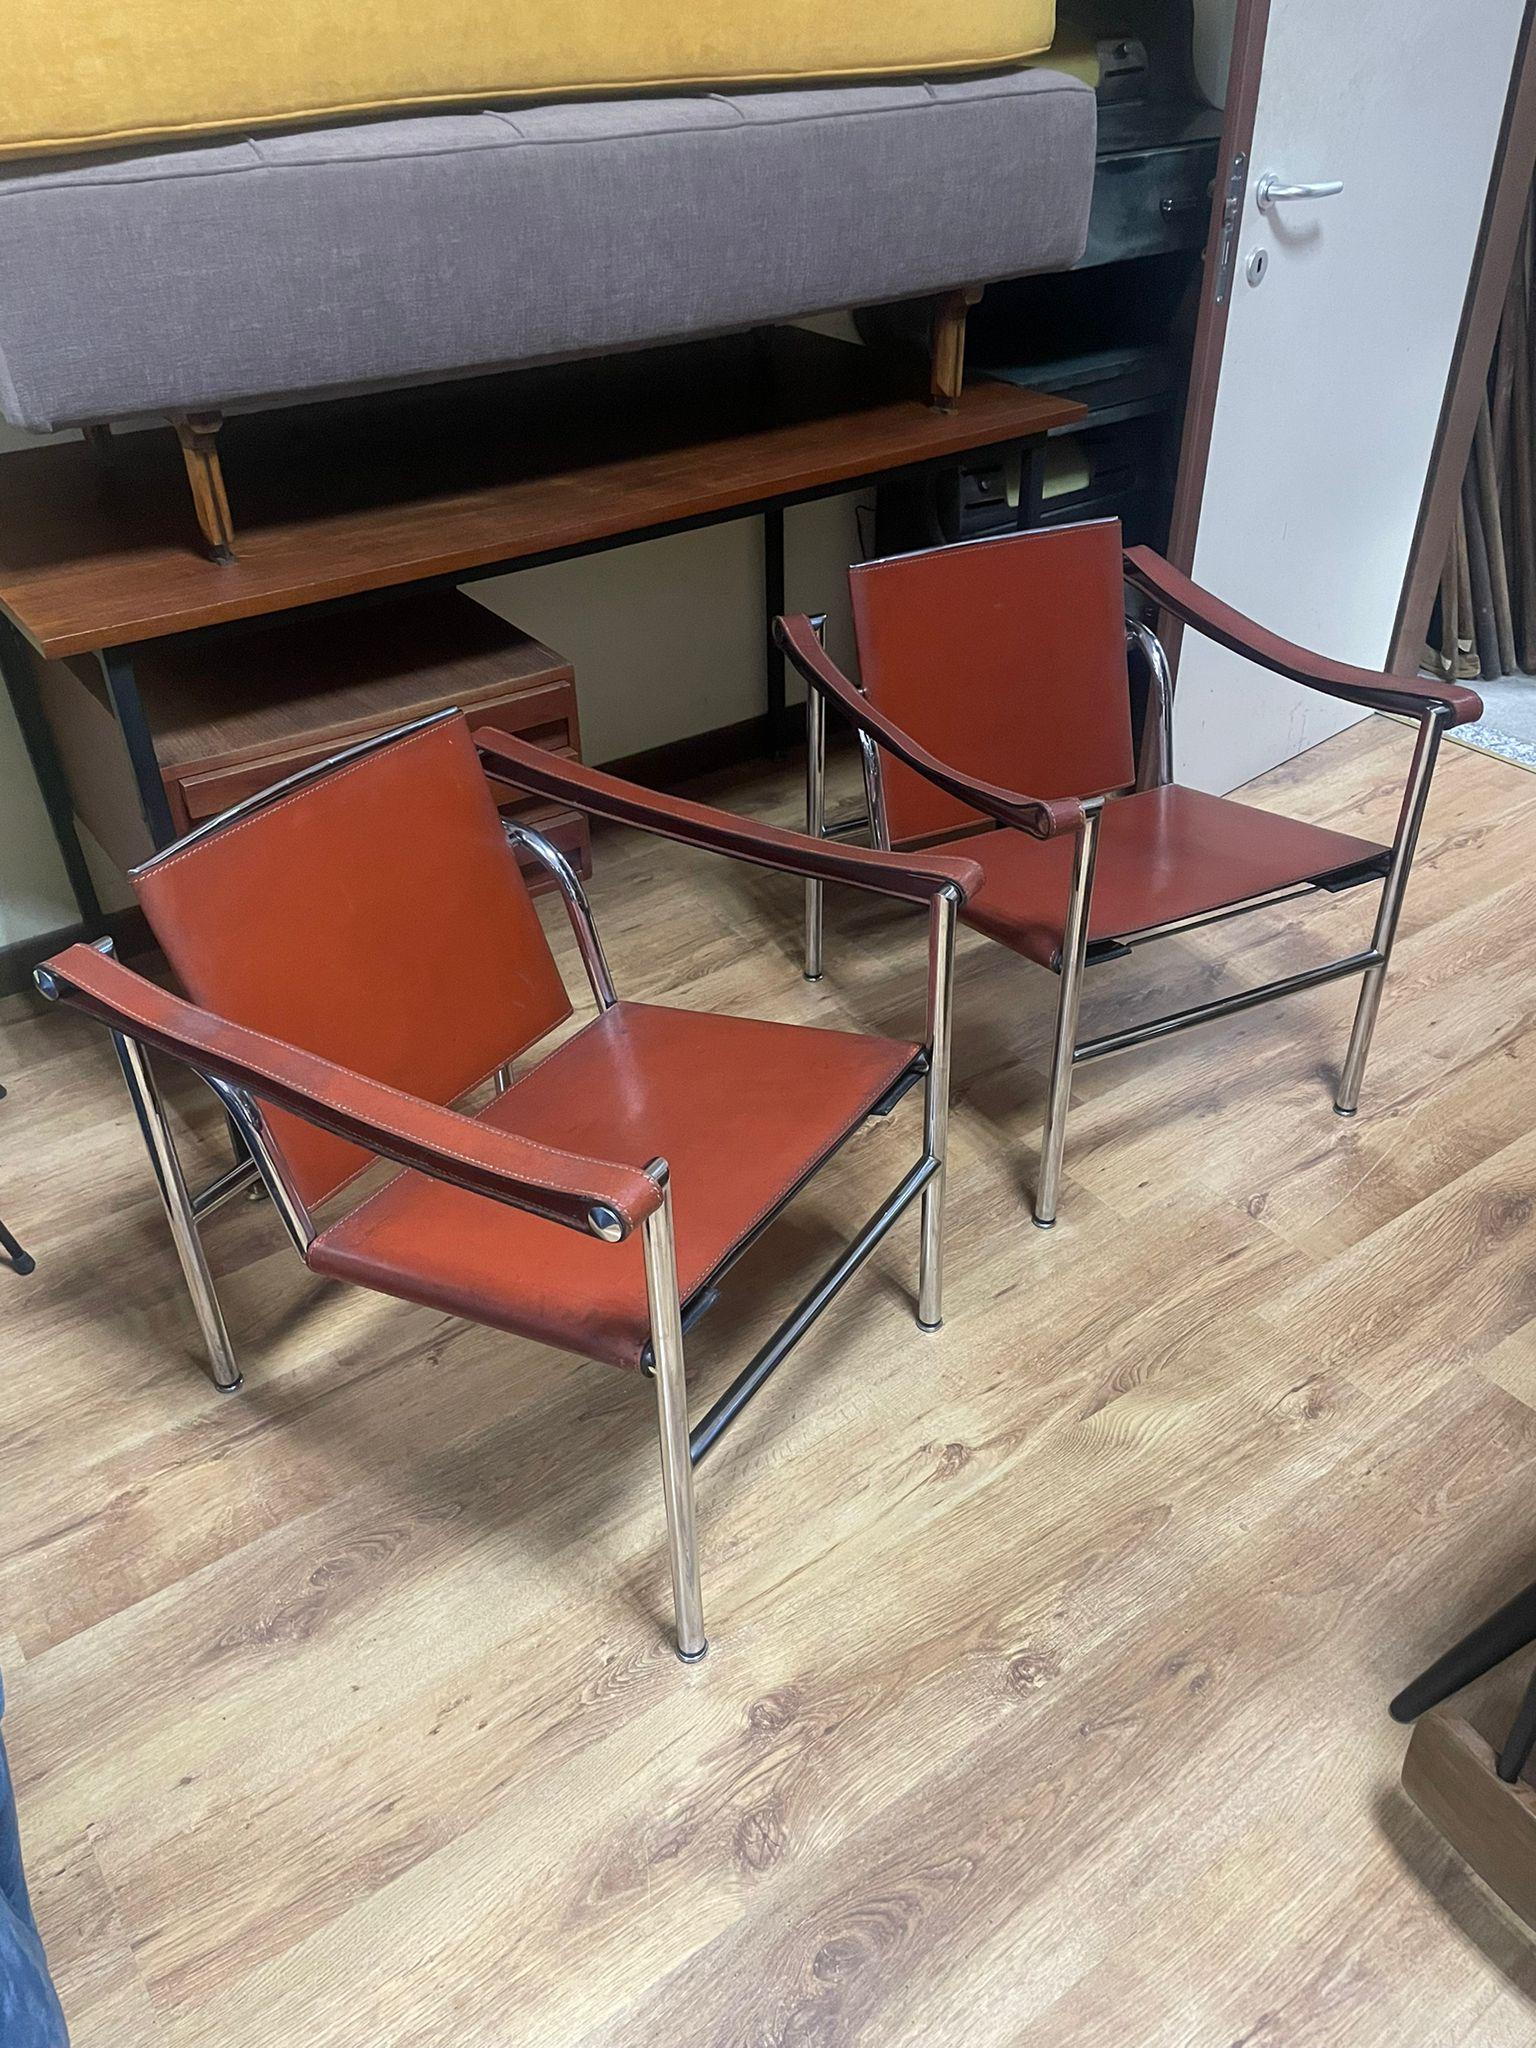 Pair of LC1 chairs by Le Corbusier for Cassina, 1970s.
Like all the furniture in the 